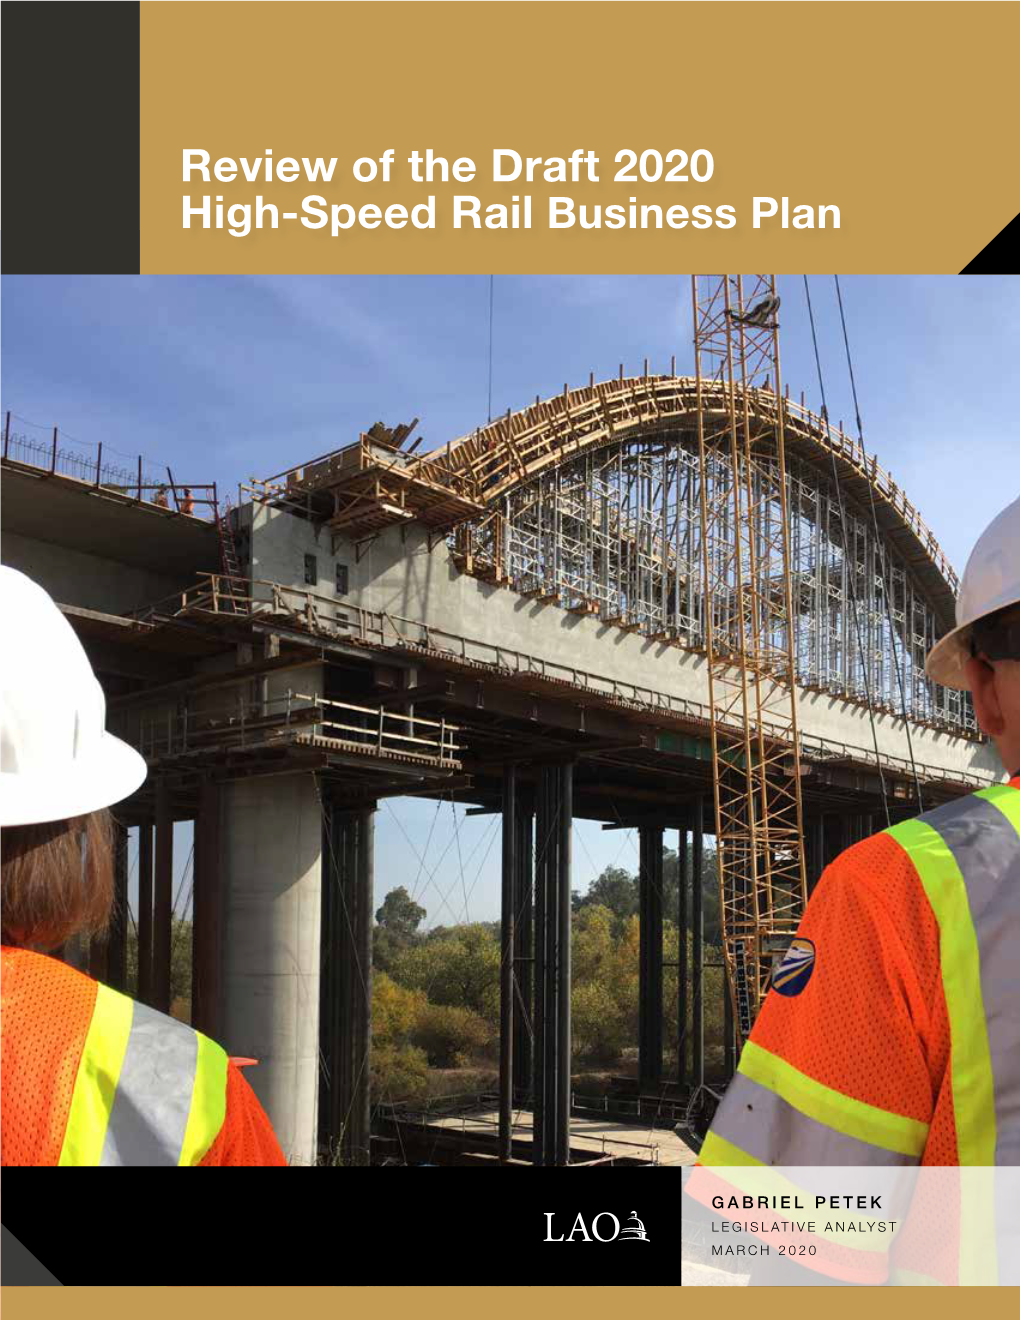 Review of the Draft 2020 High-Speed Rail Business Plan